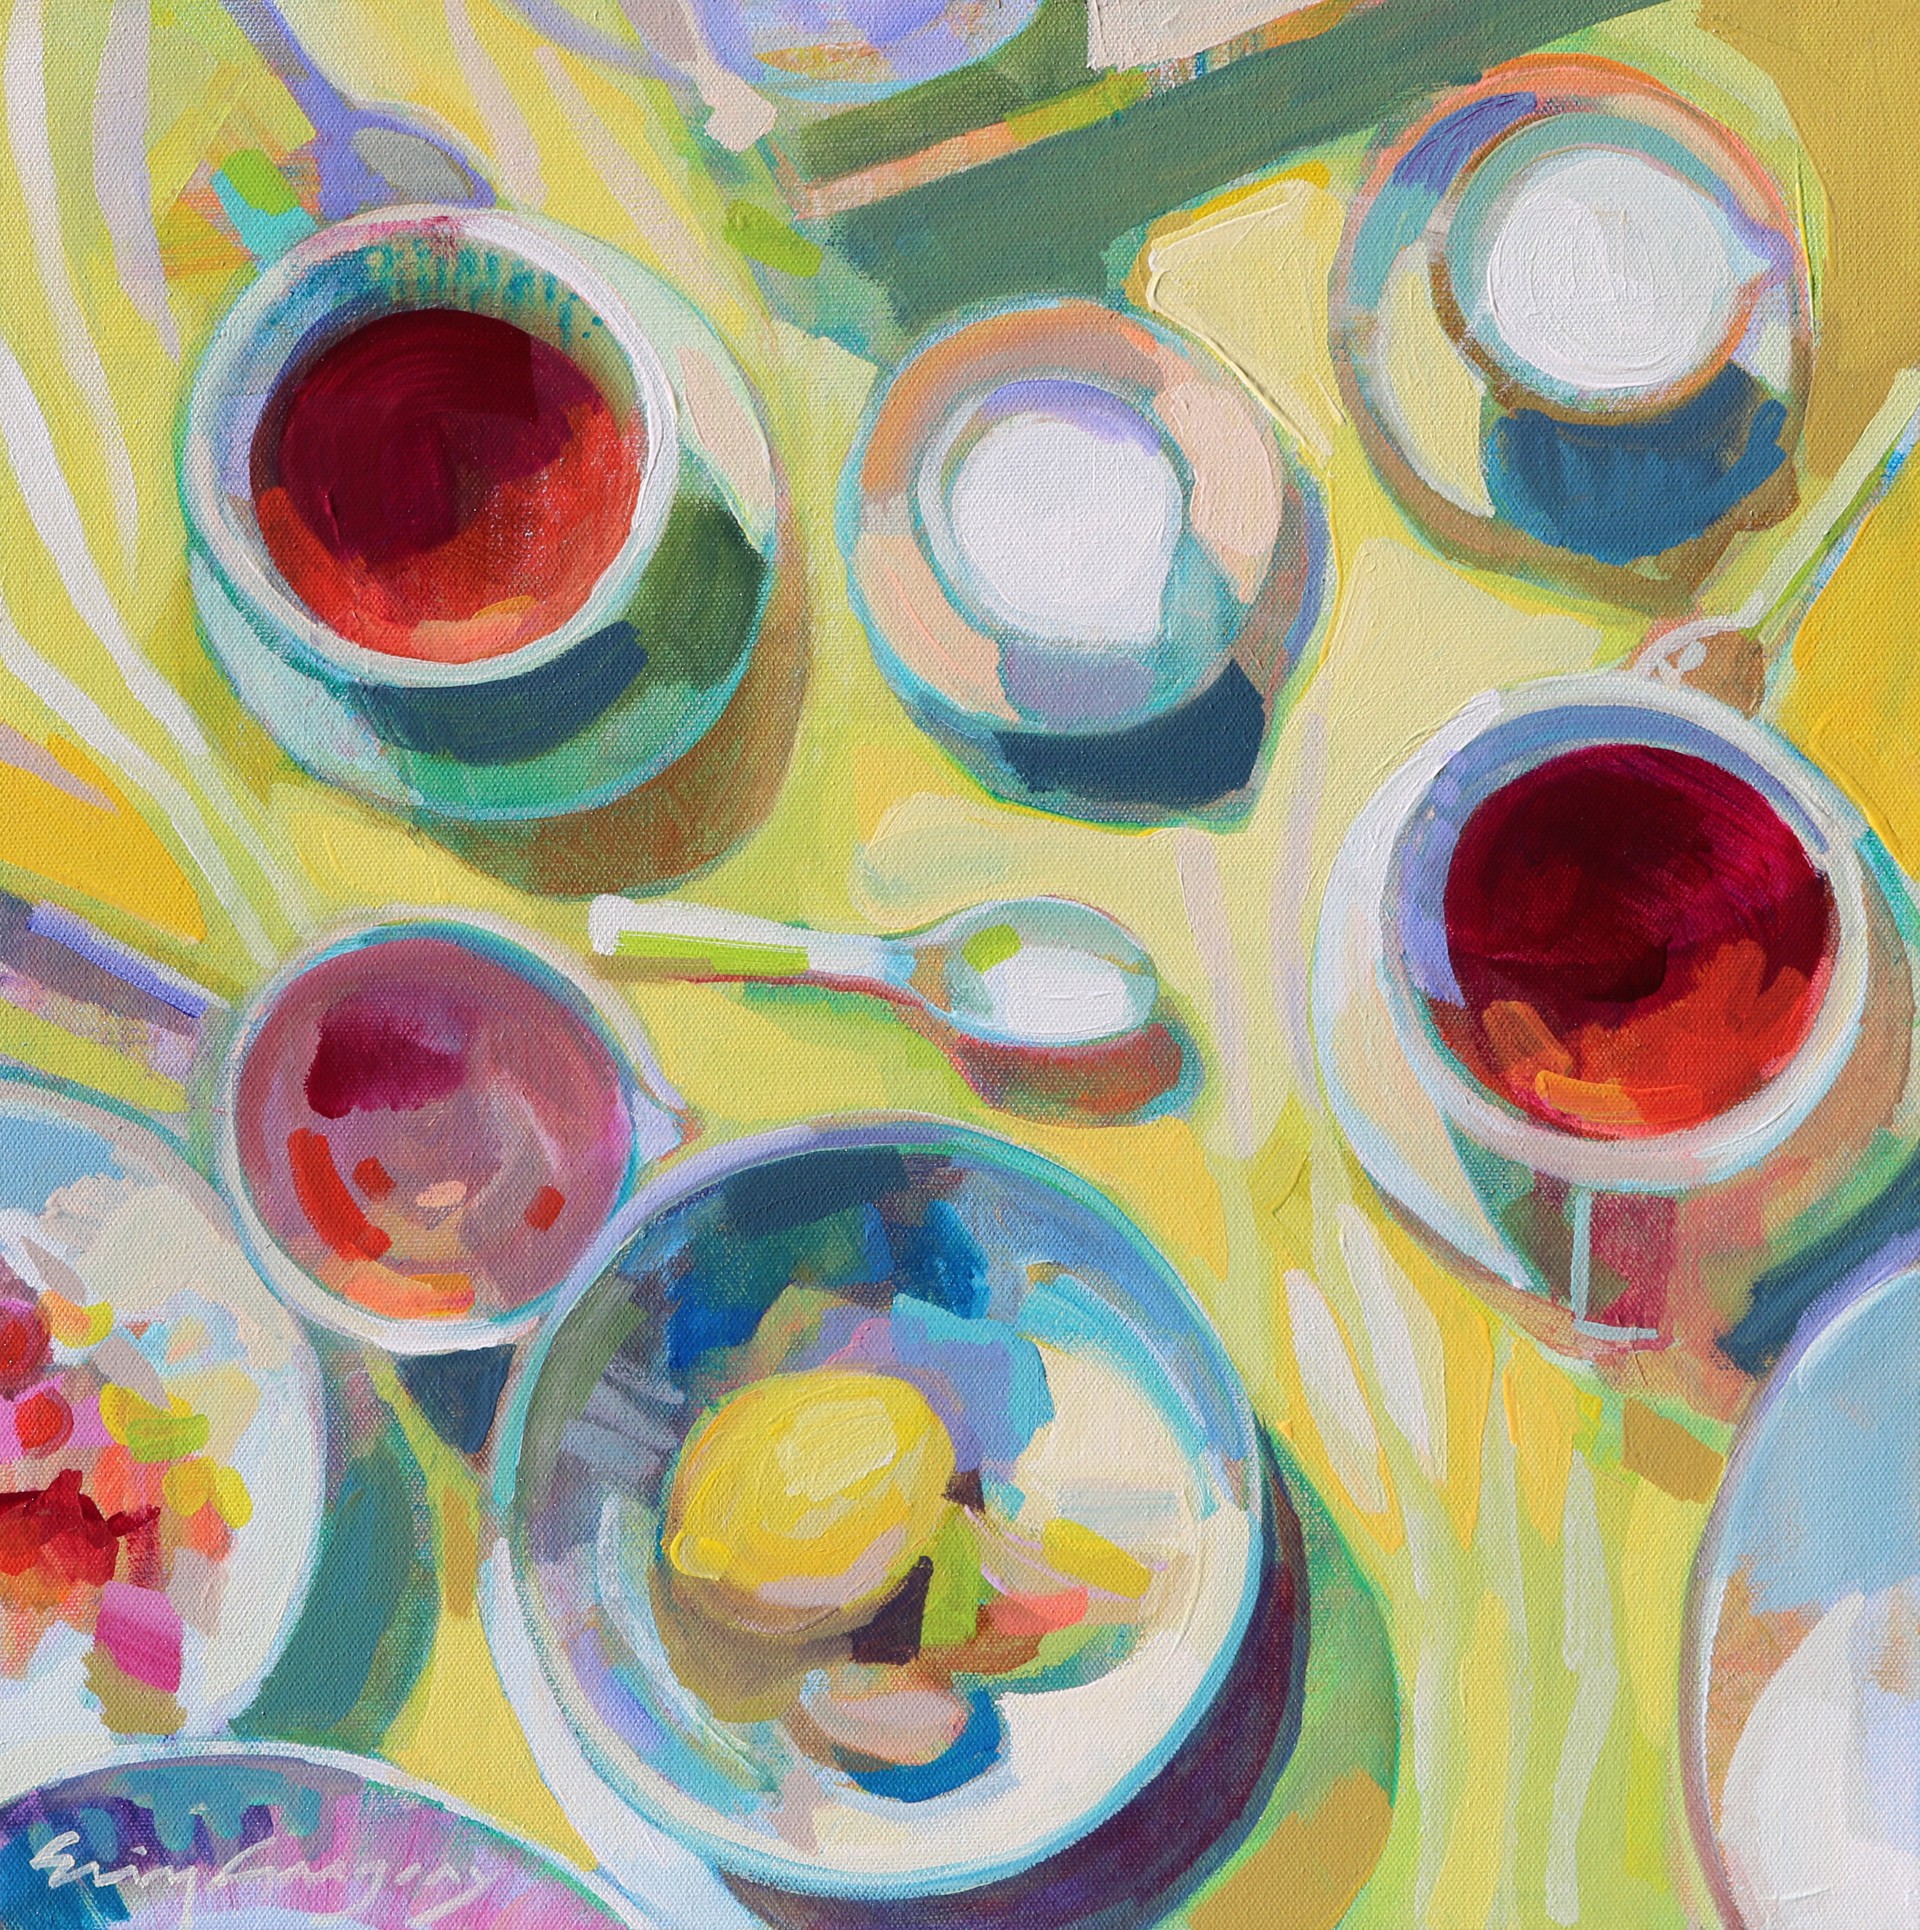 The Breakfast Table 1 by Erin Gregory